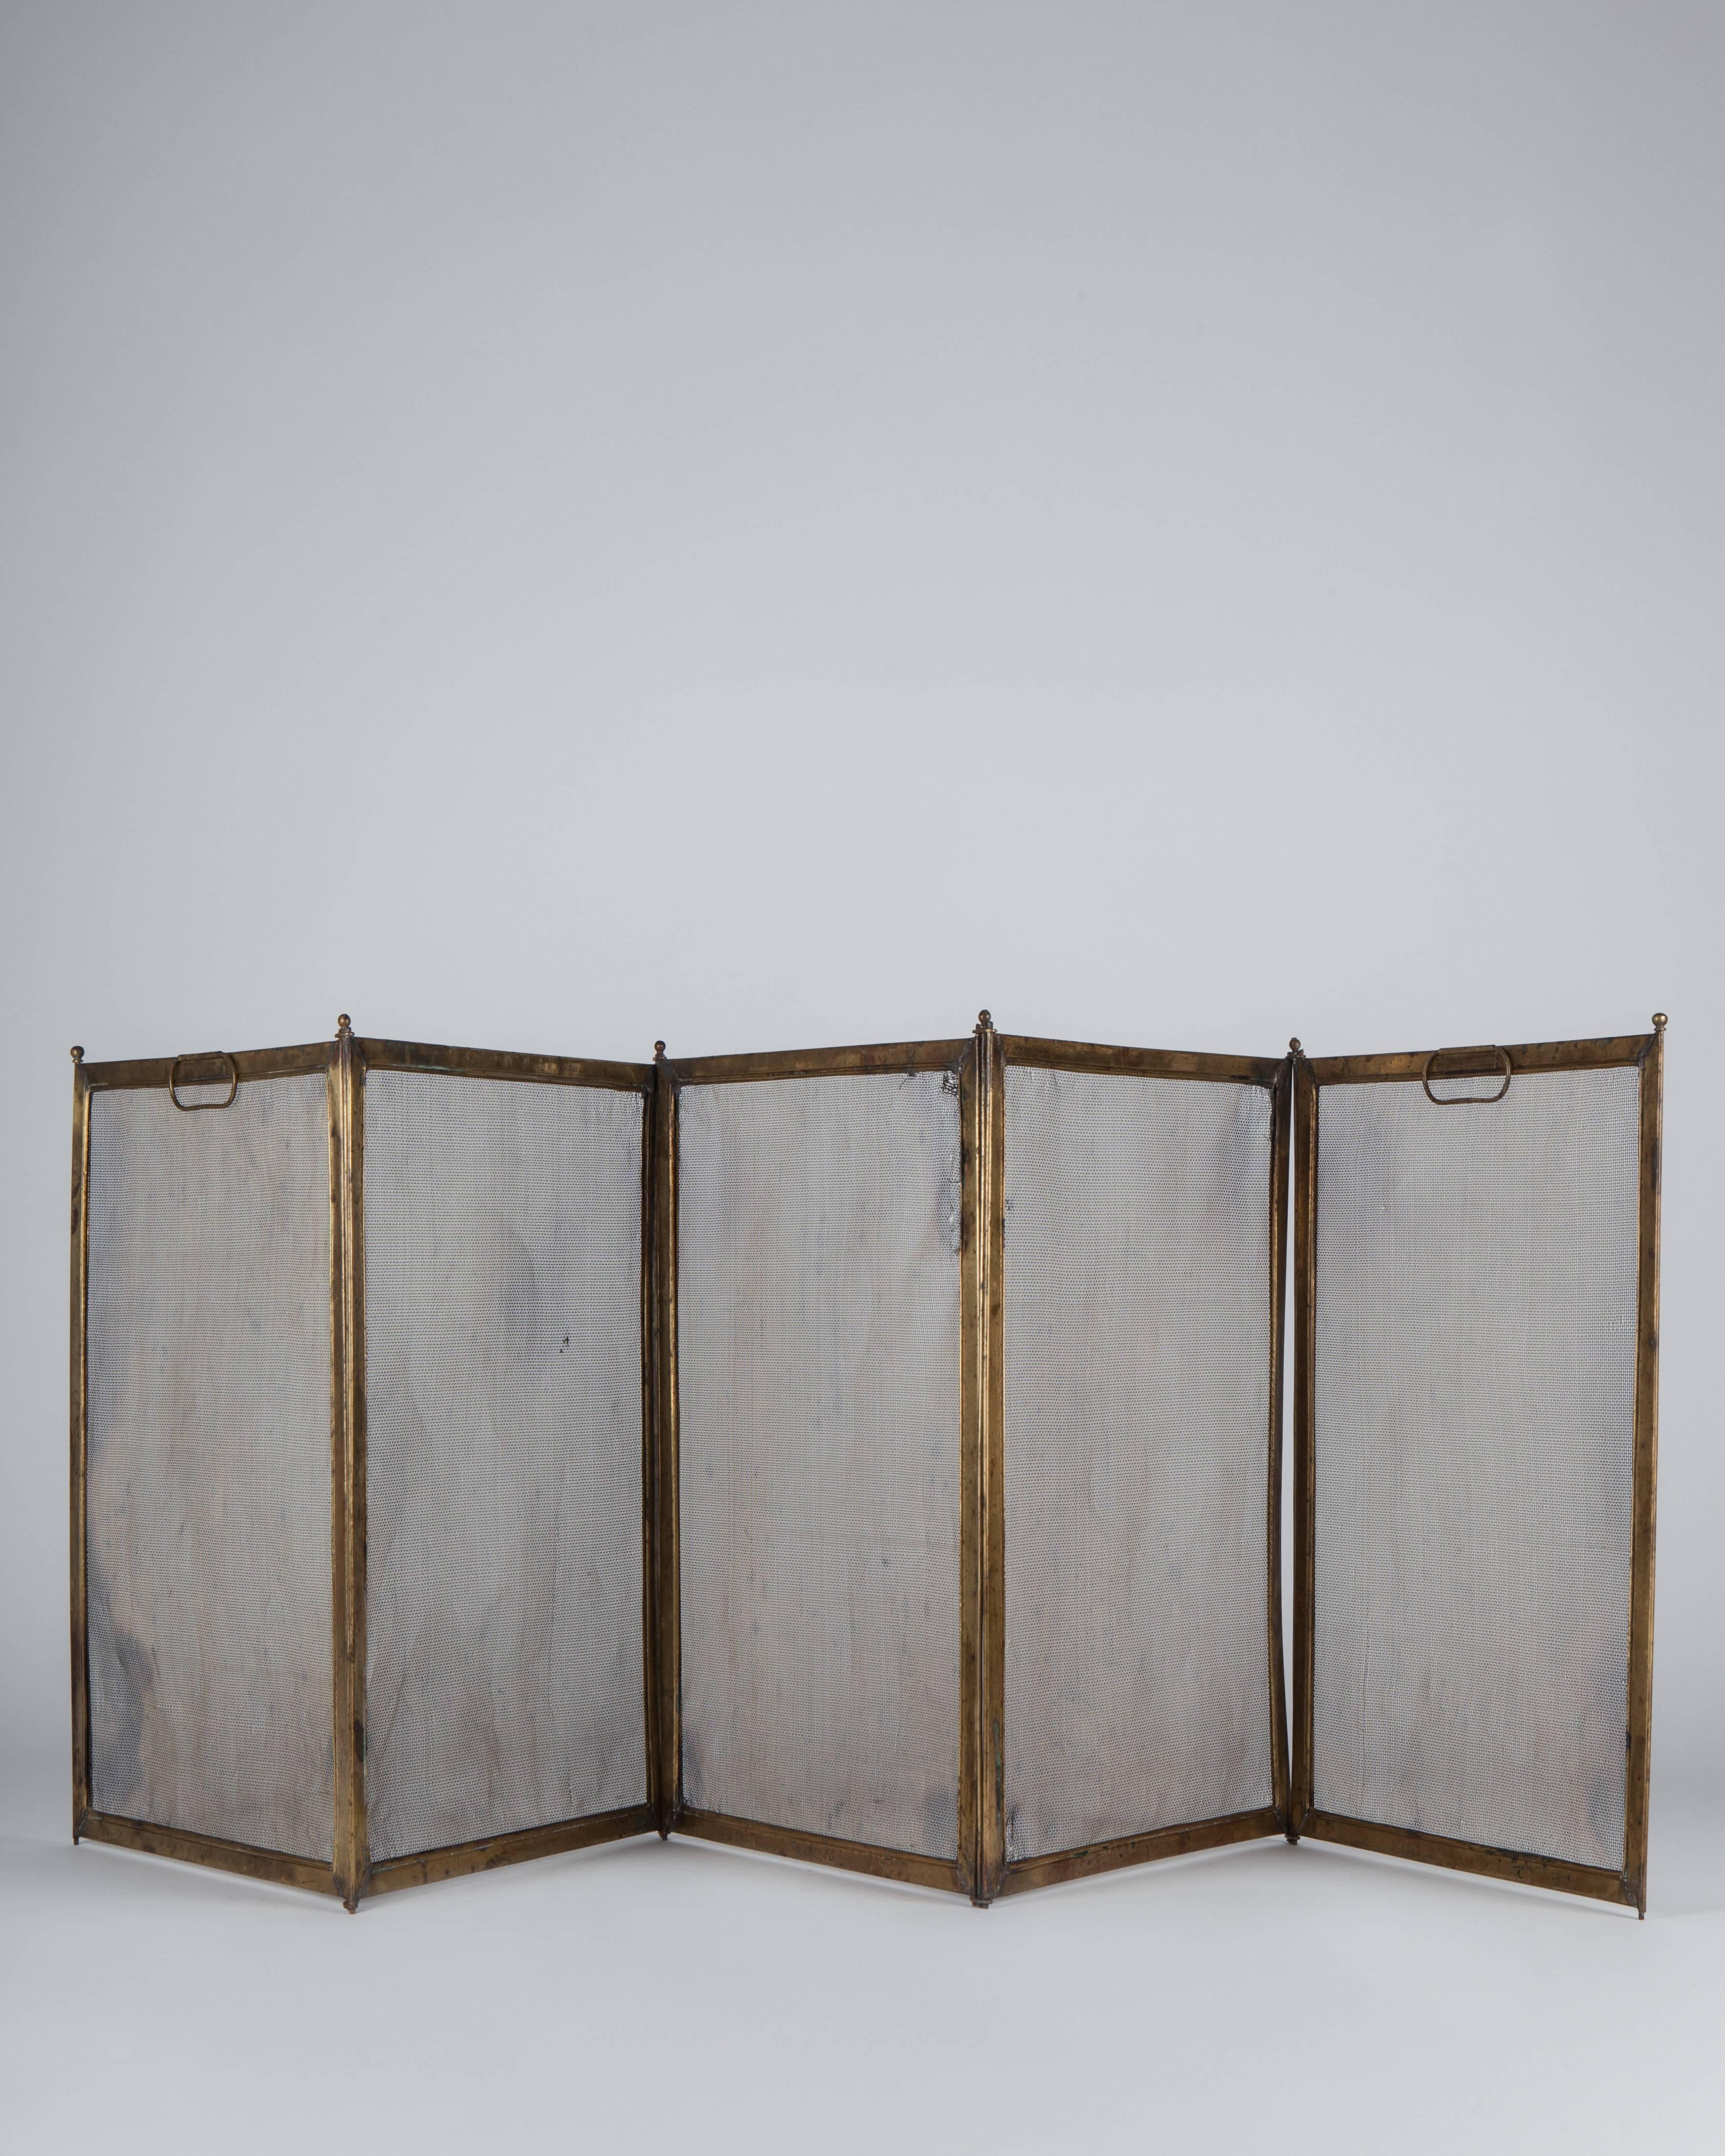 AFP0532
An antique five panel folding fire screen with brass framing and woven mesh panels.

Dimensions:
Overall (extended): 20-3/4